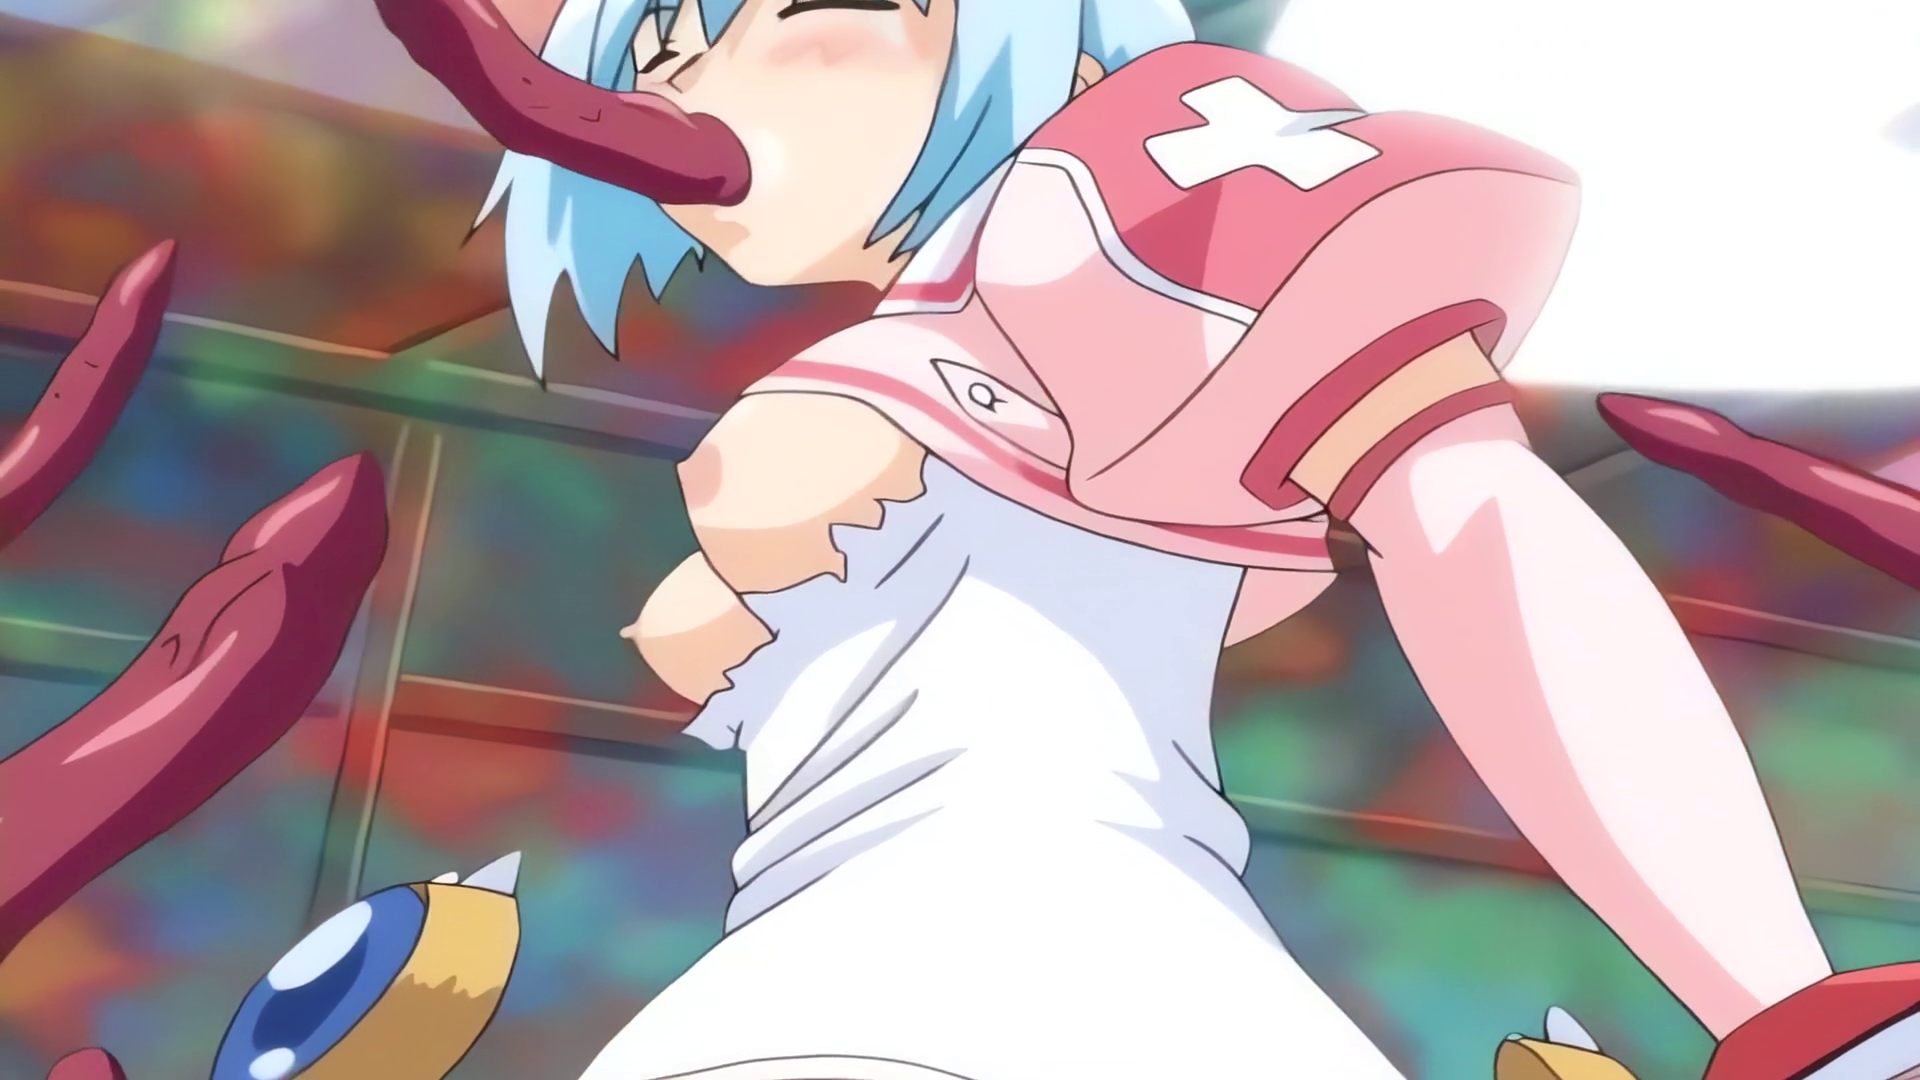 thumbnail for Makai Tenshi Djibril 4 on oppai.stream, all your anime hentai needs in one place